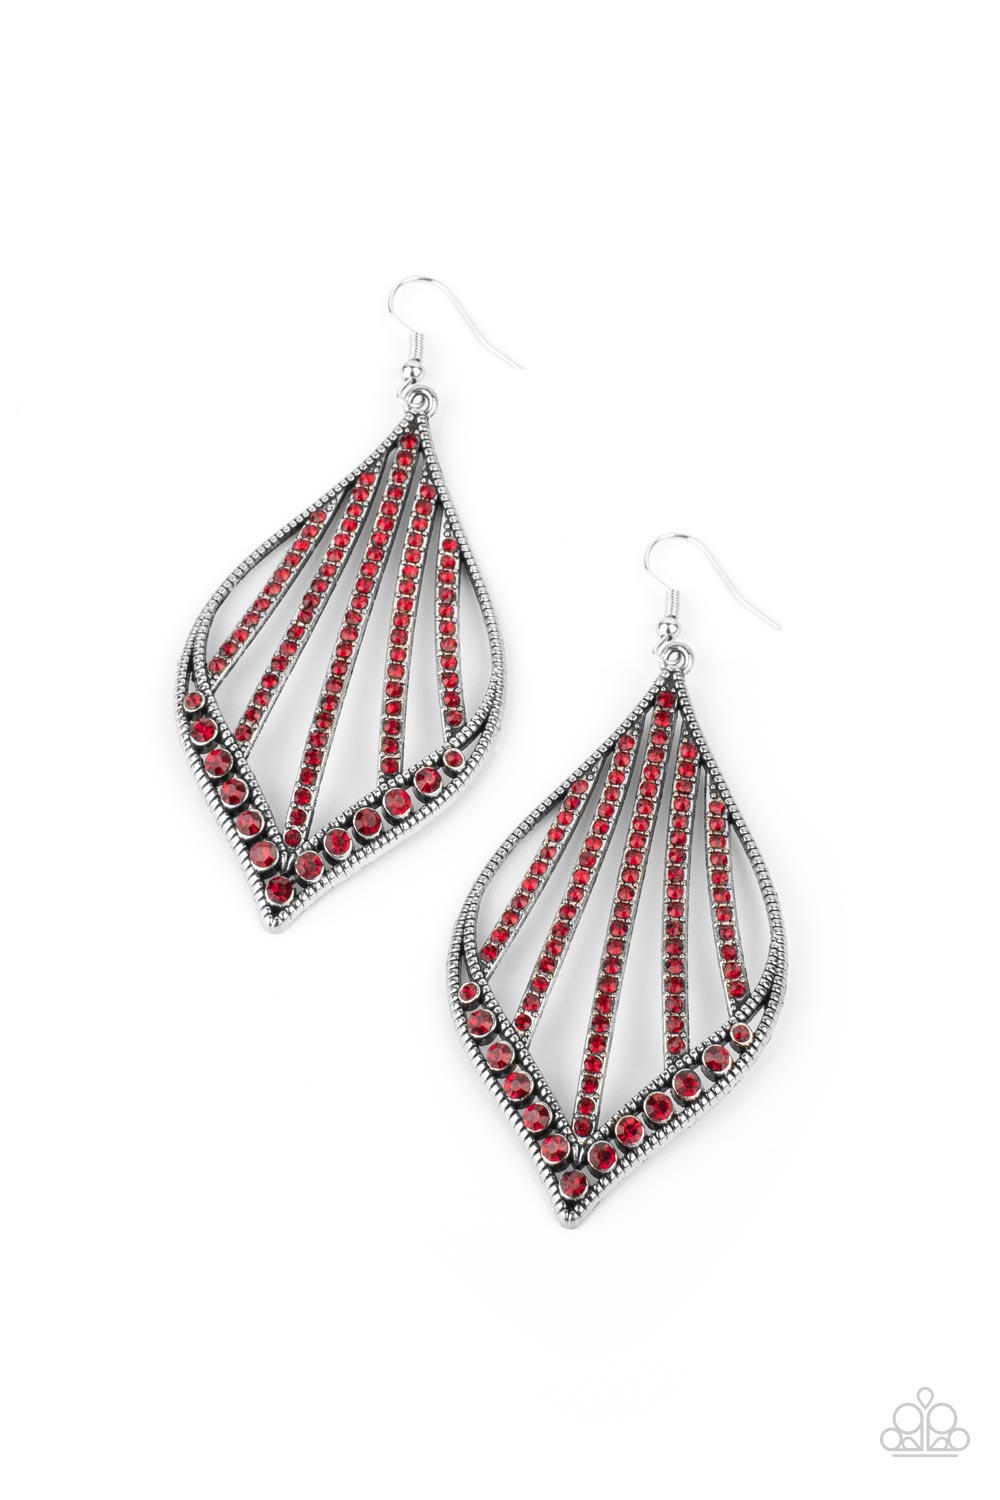 Showcase Sparkle Red Rhinestone Earrings - Paparazzi Accessories- lightbox - CarasShop.com - $5 Jewelry by Cara Jewels